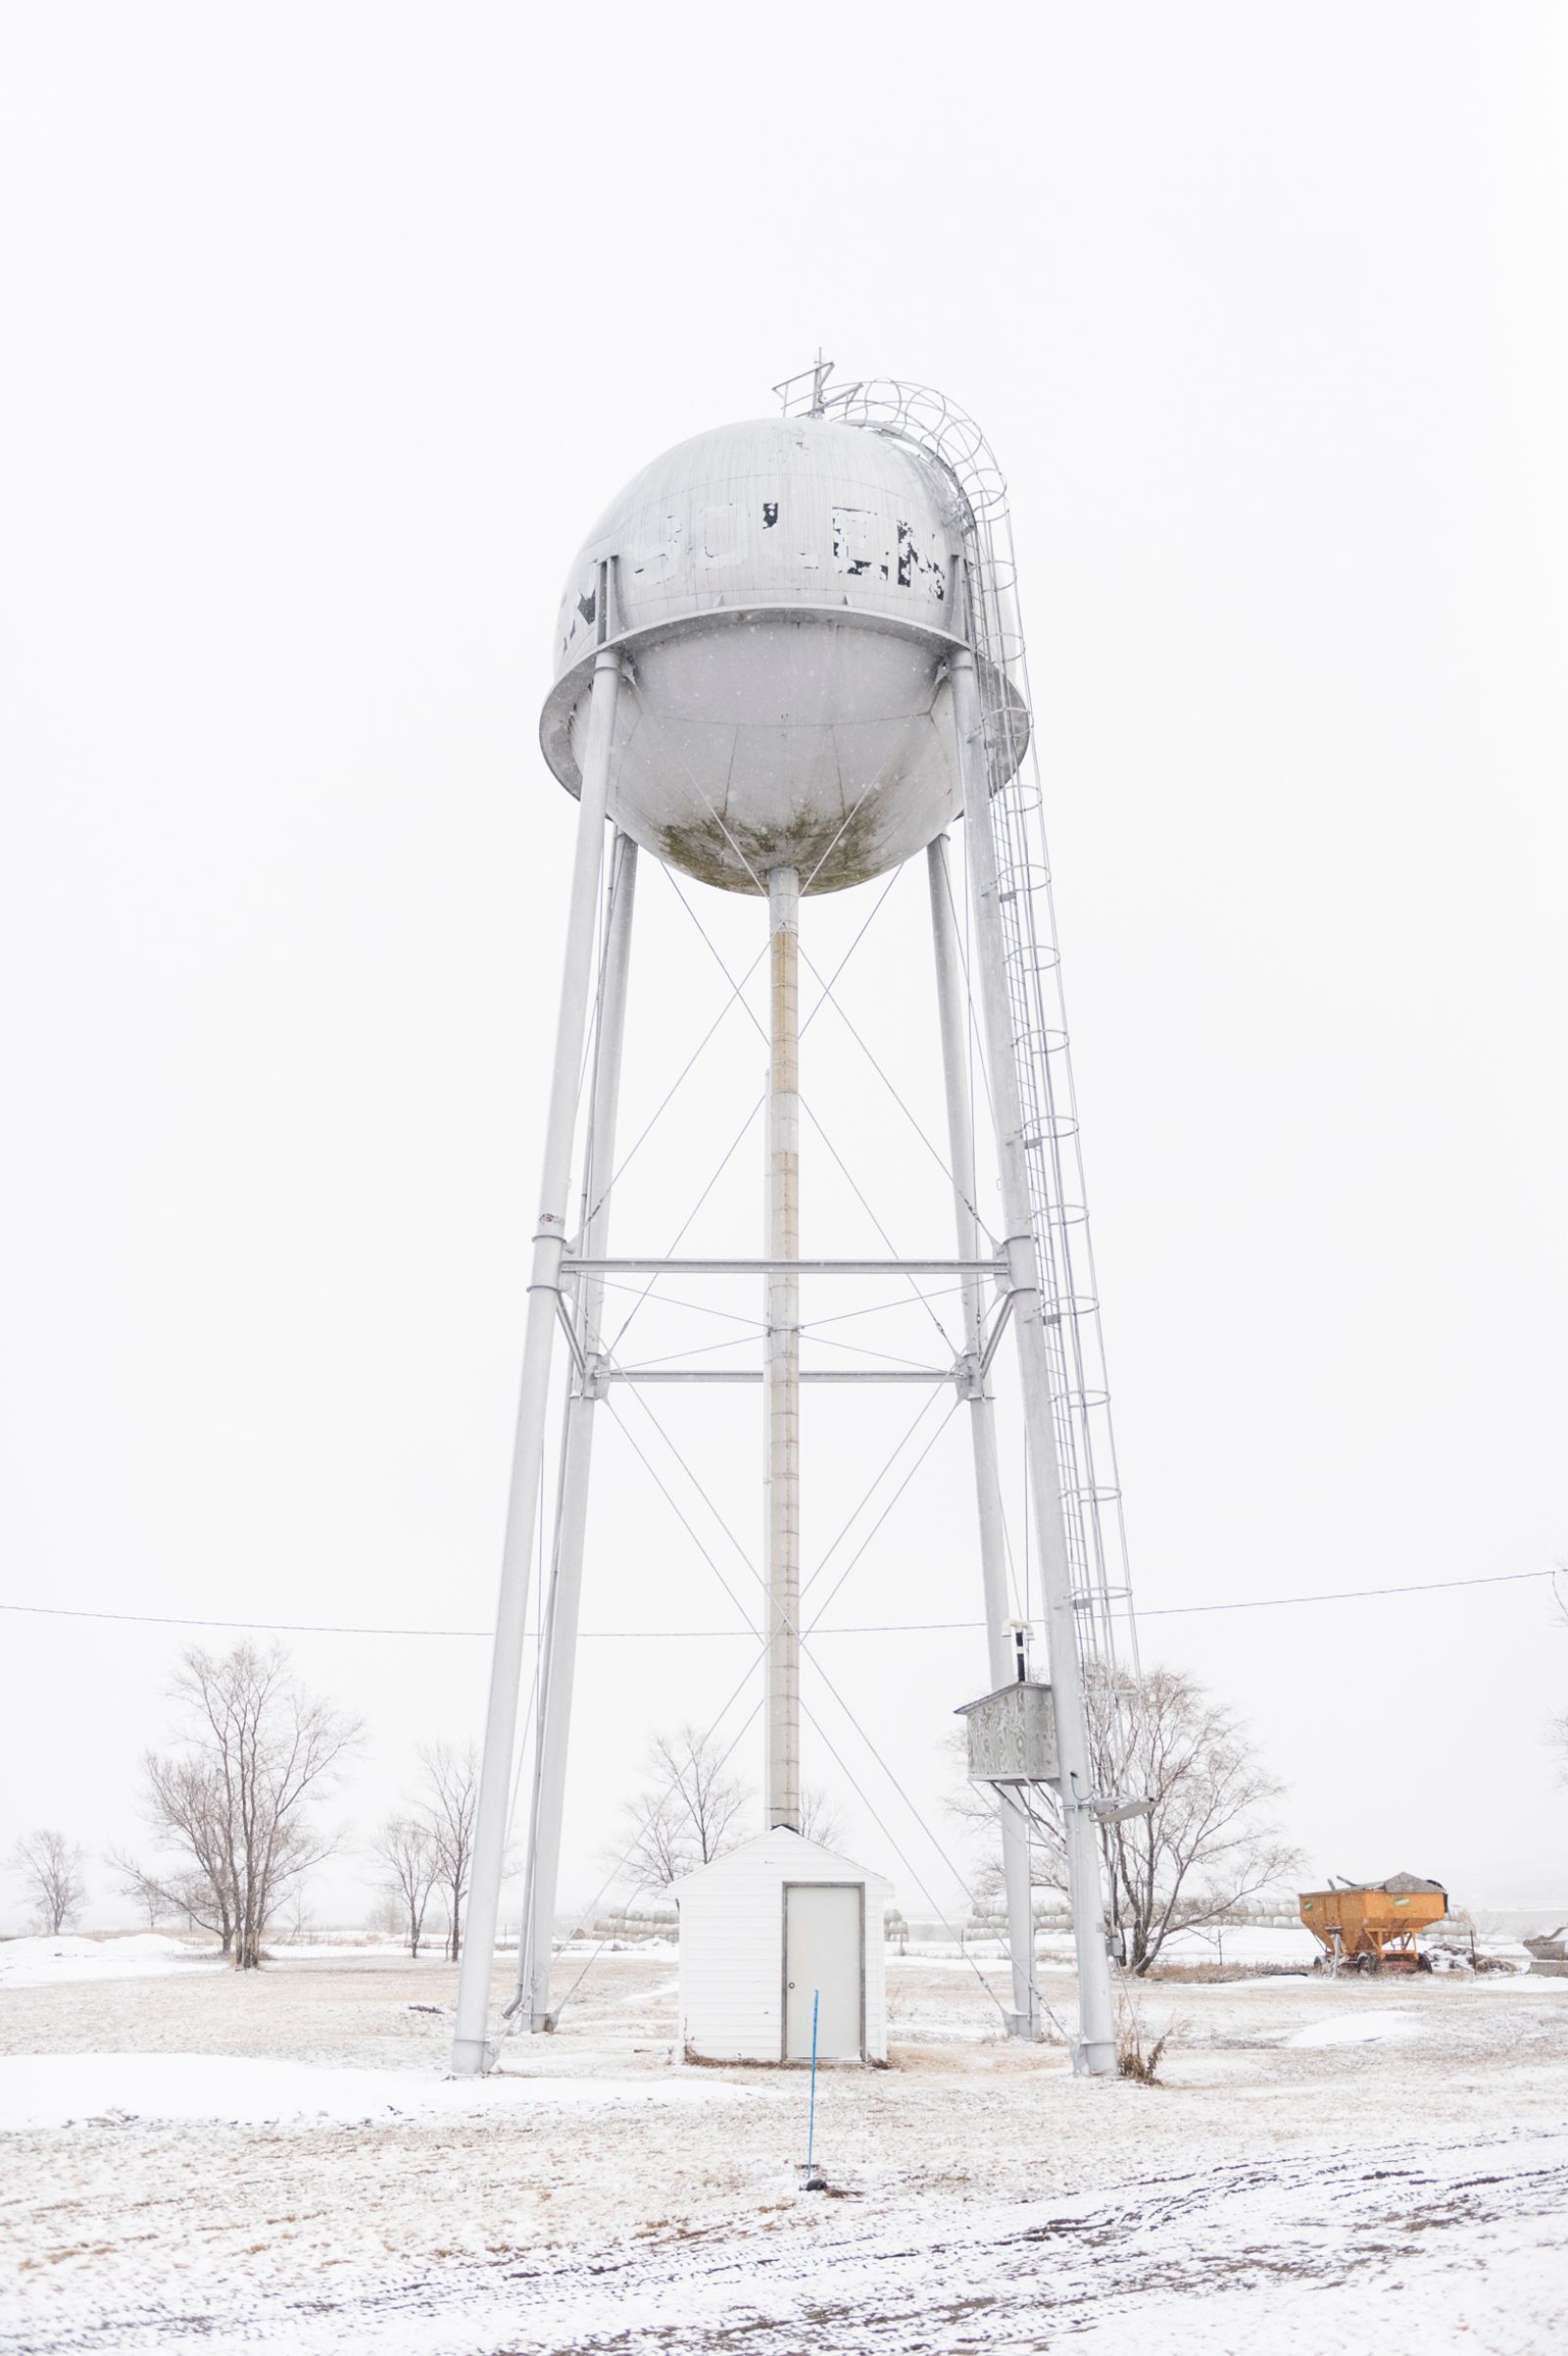 © Michela&amp;Emanuela Colombo - Water tower. On the way from Cannon Ball to Bismarck Highway 6, ND.